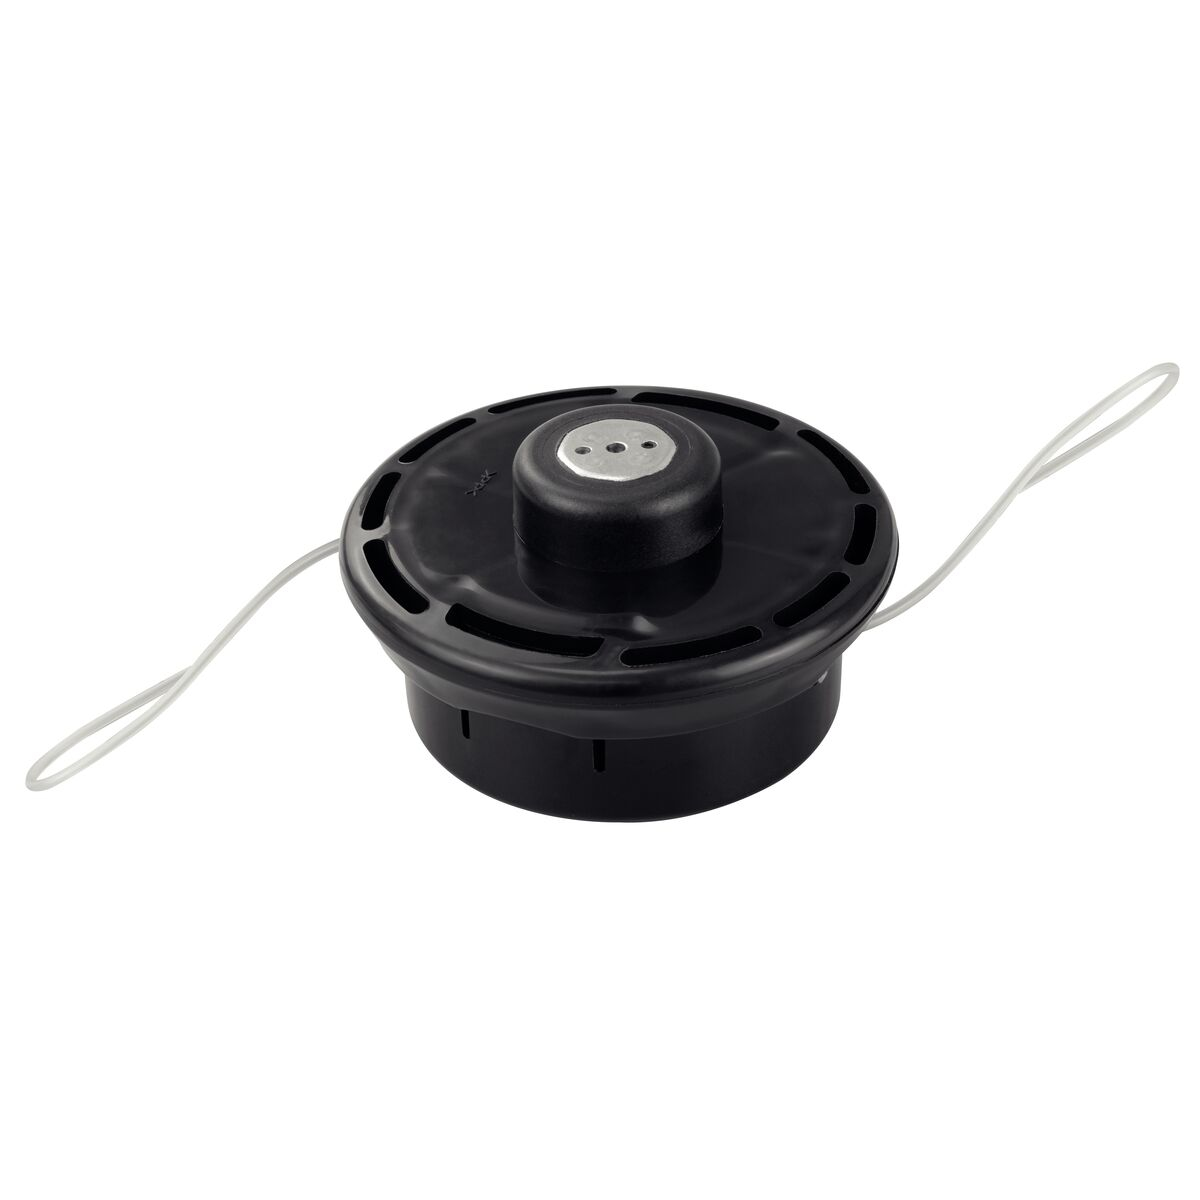 Tramontina 2.4-mm 2-Nylon-String Spool Measuring 3 m in Length for Grass Trimmers RC43, RC33B, RC43B, RC33MTD and RC43MTD